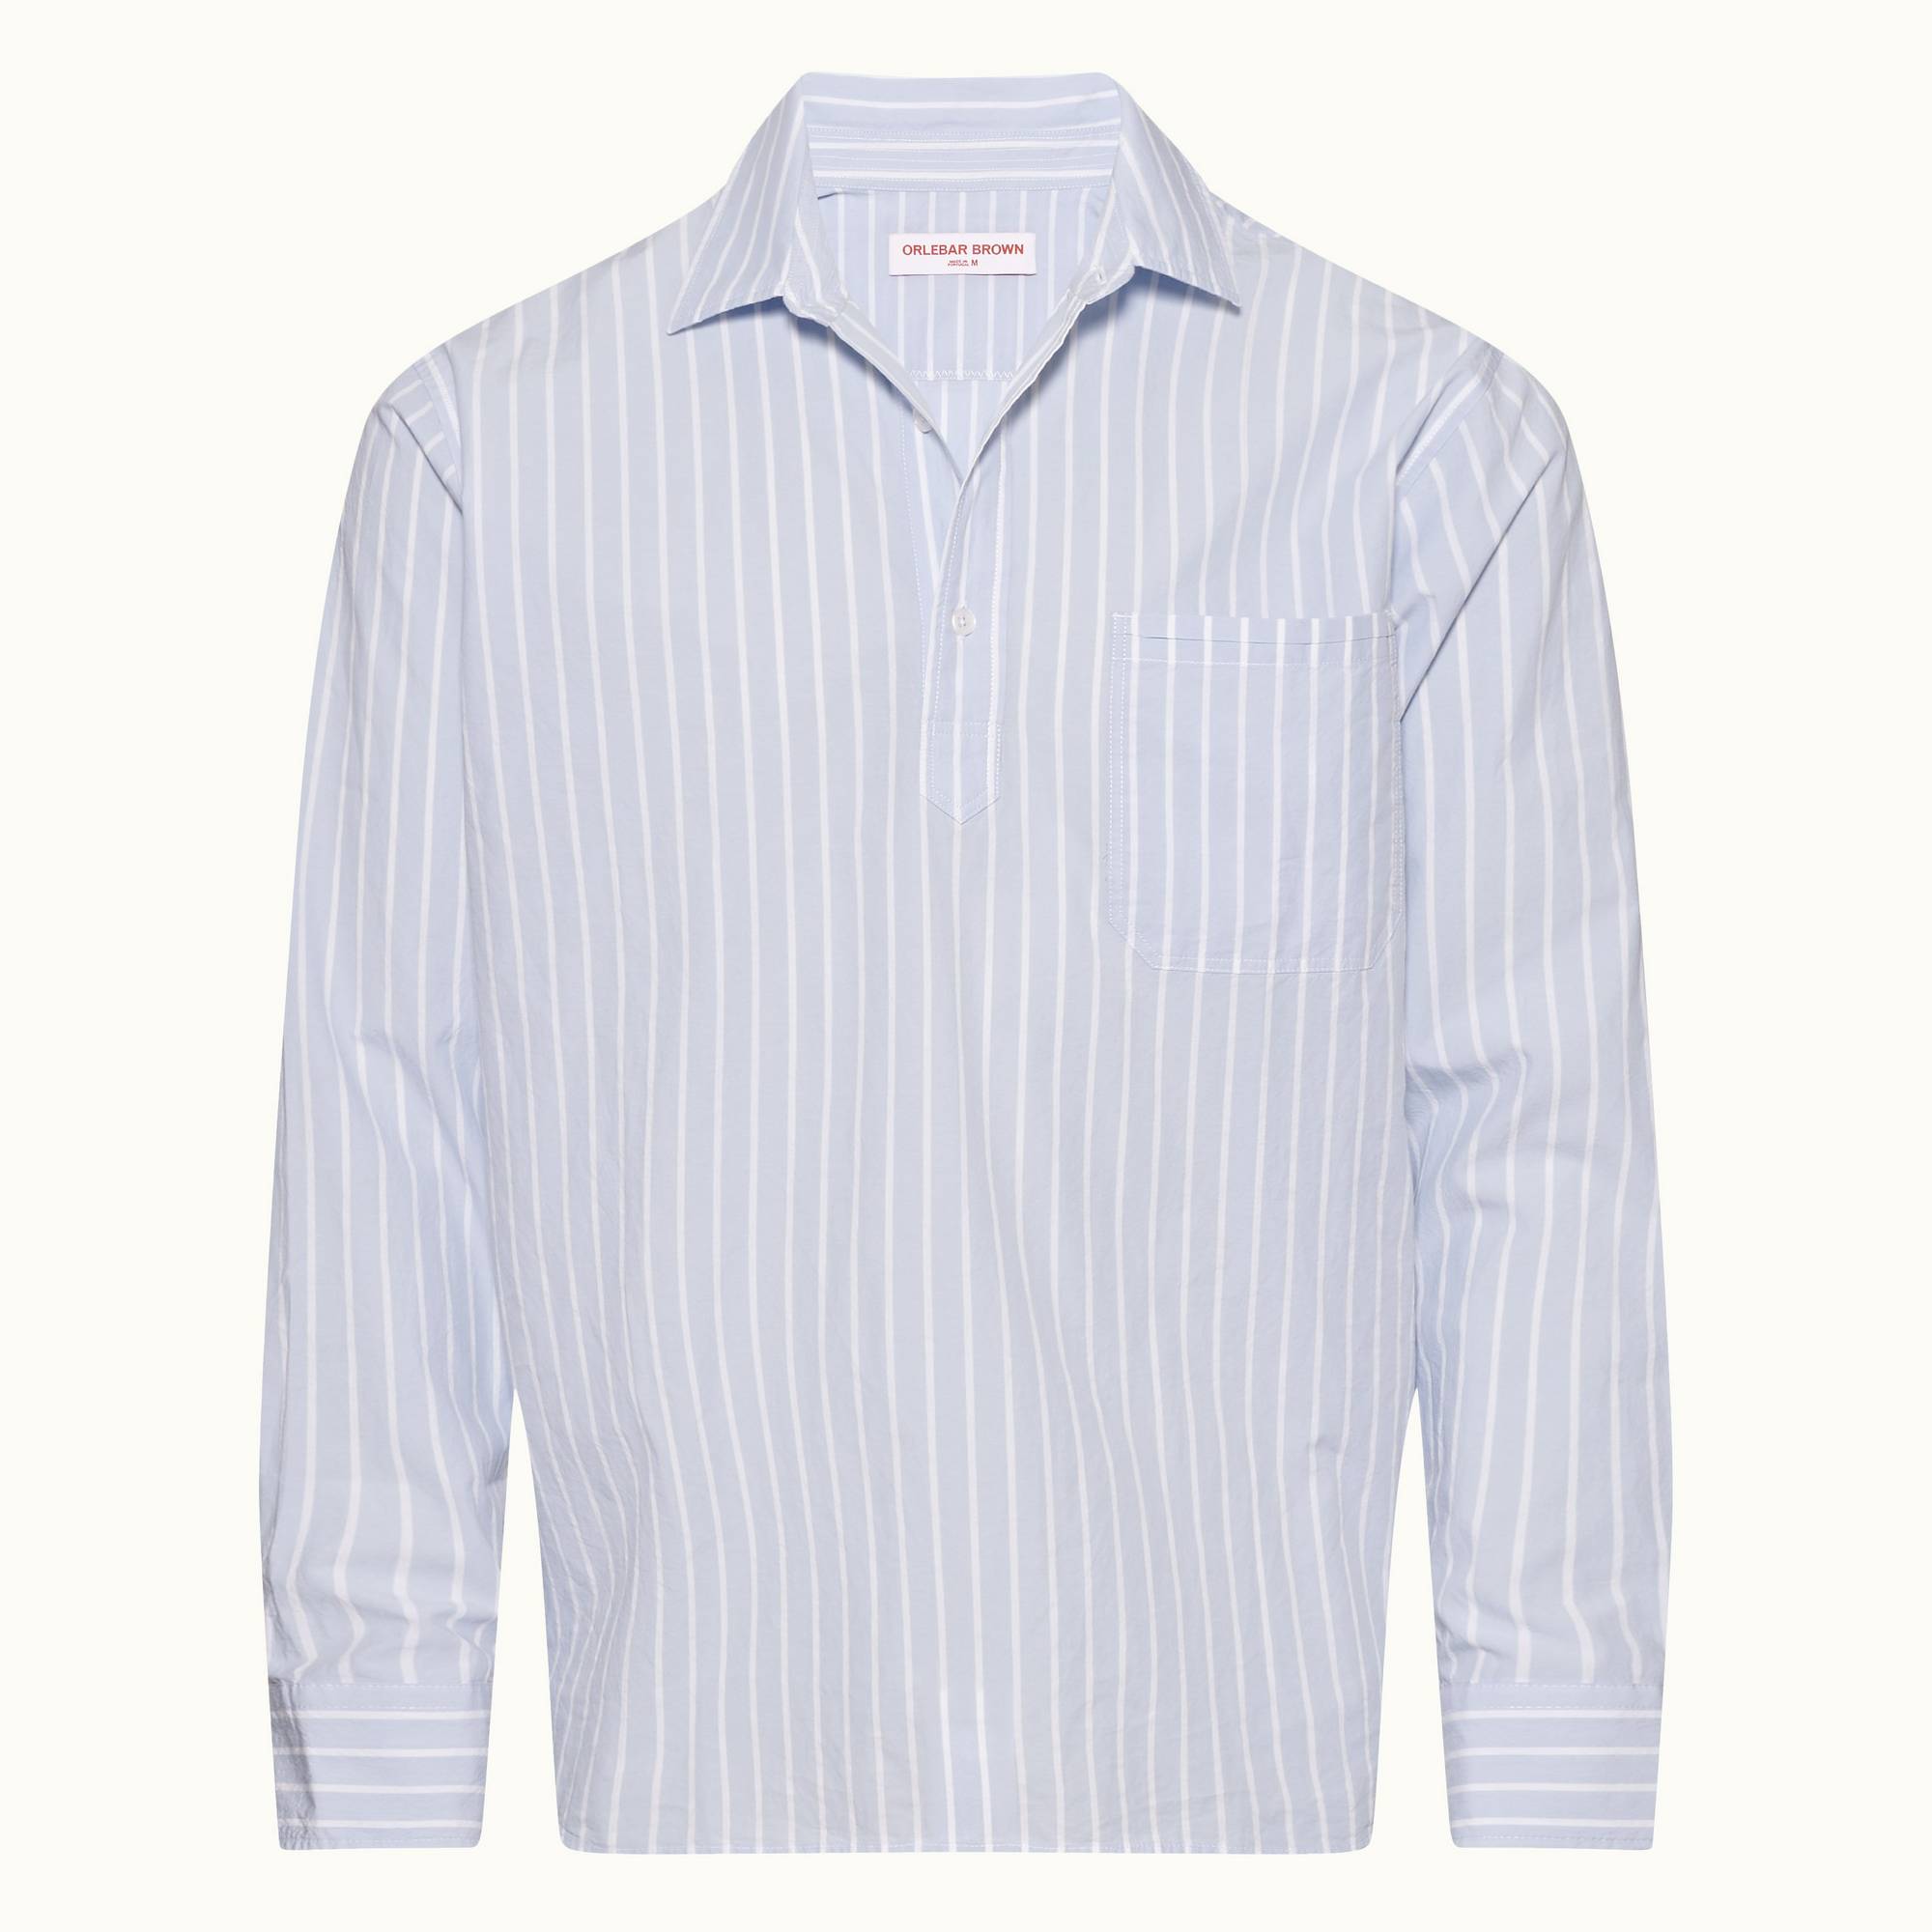 Shanklin - Mens Serenity Blue/White Stripe Relaxed Fit Overhead Cotton Shirt